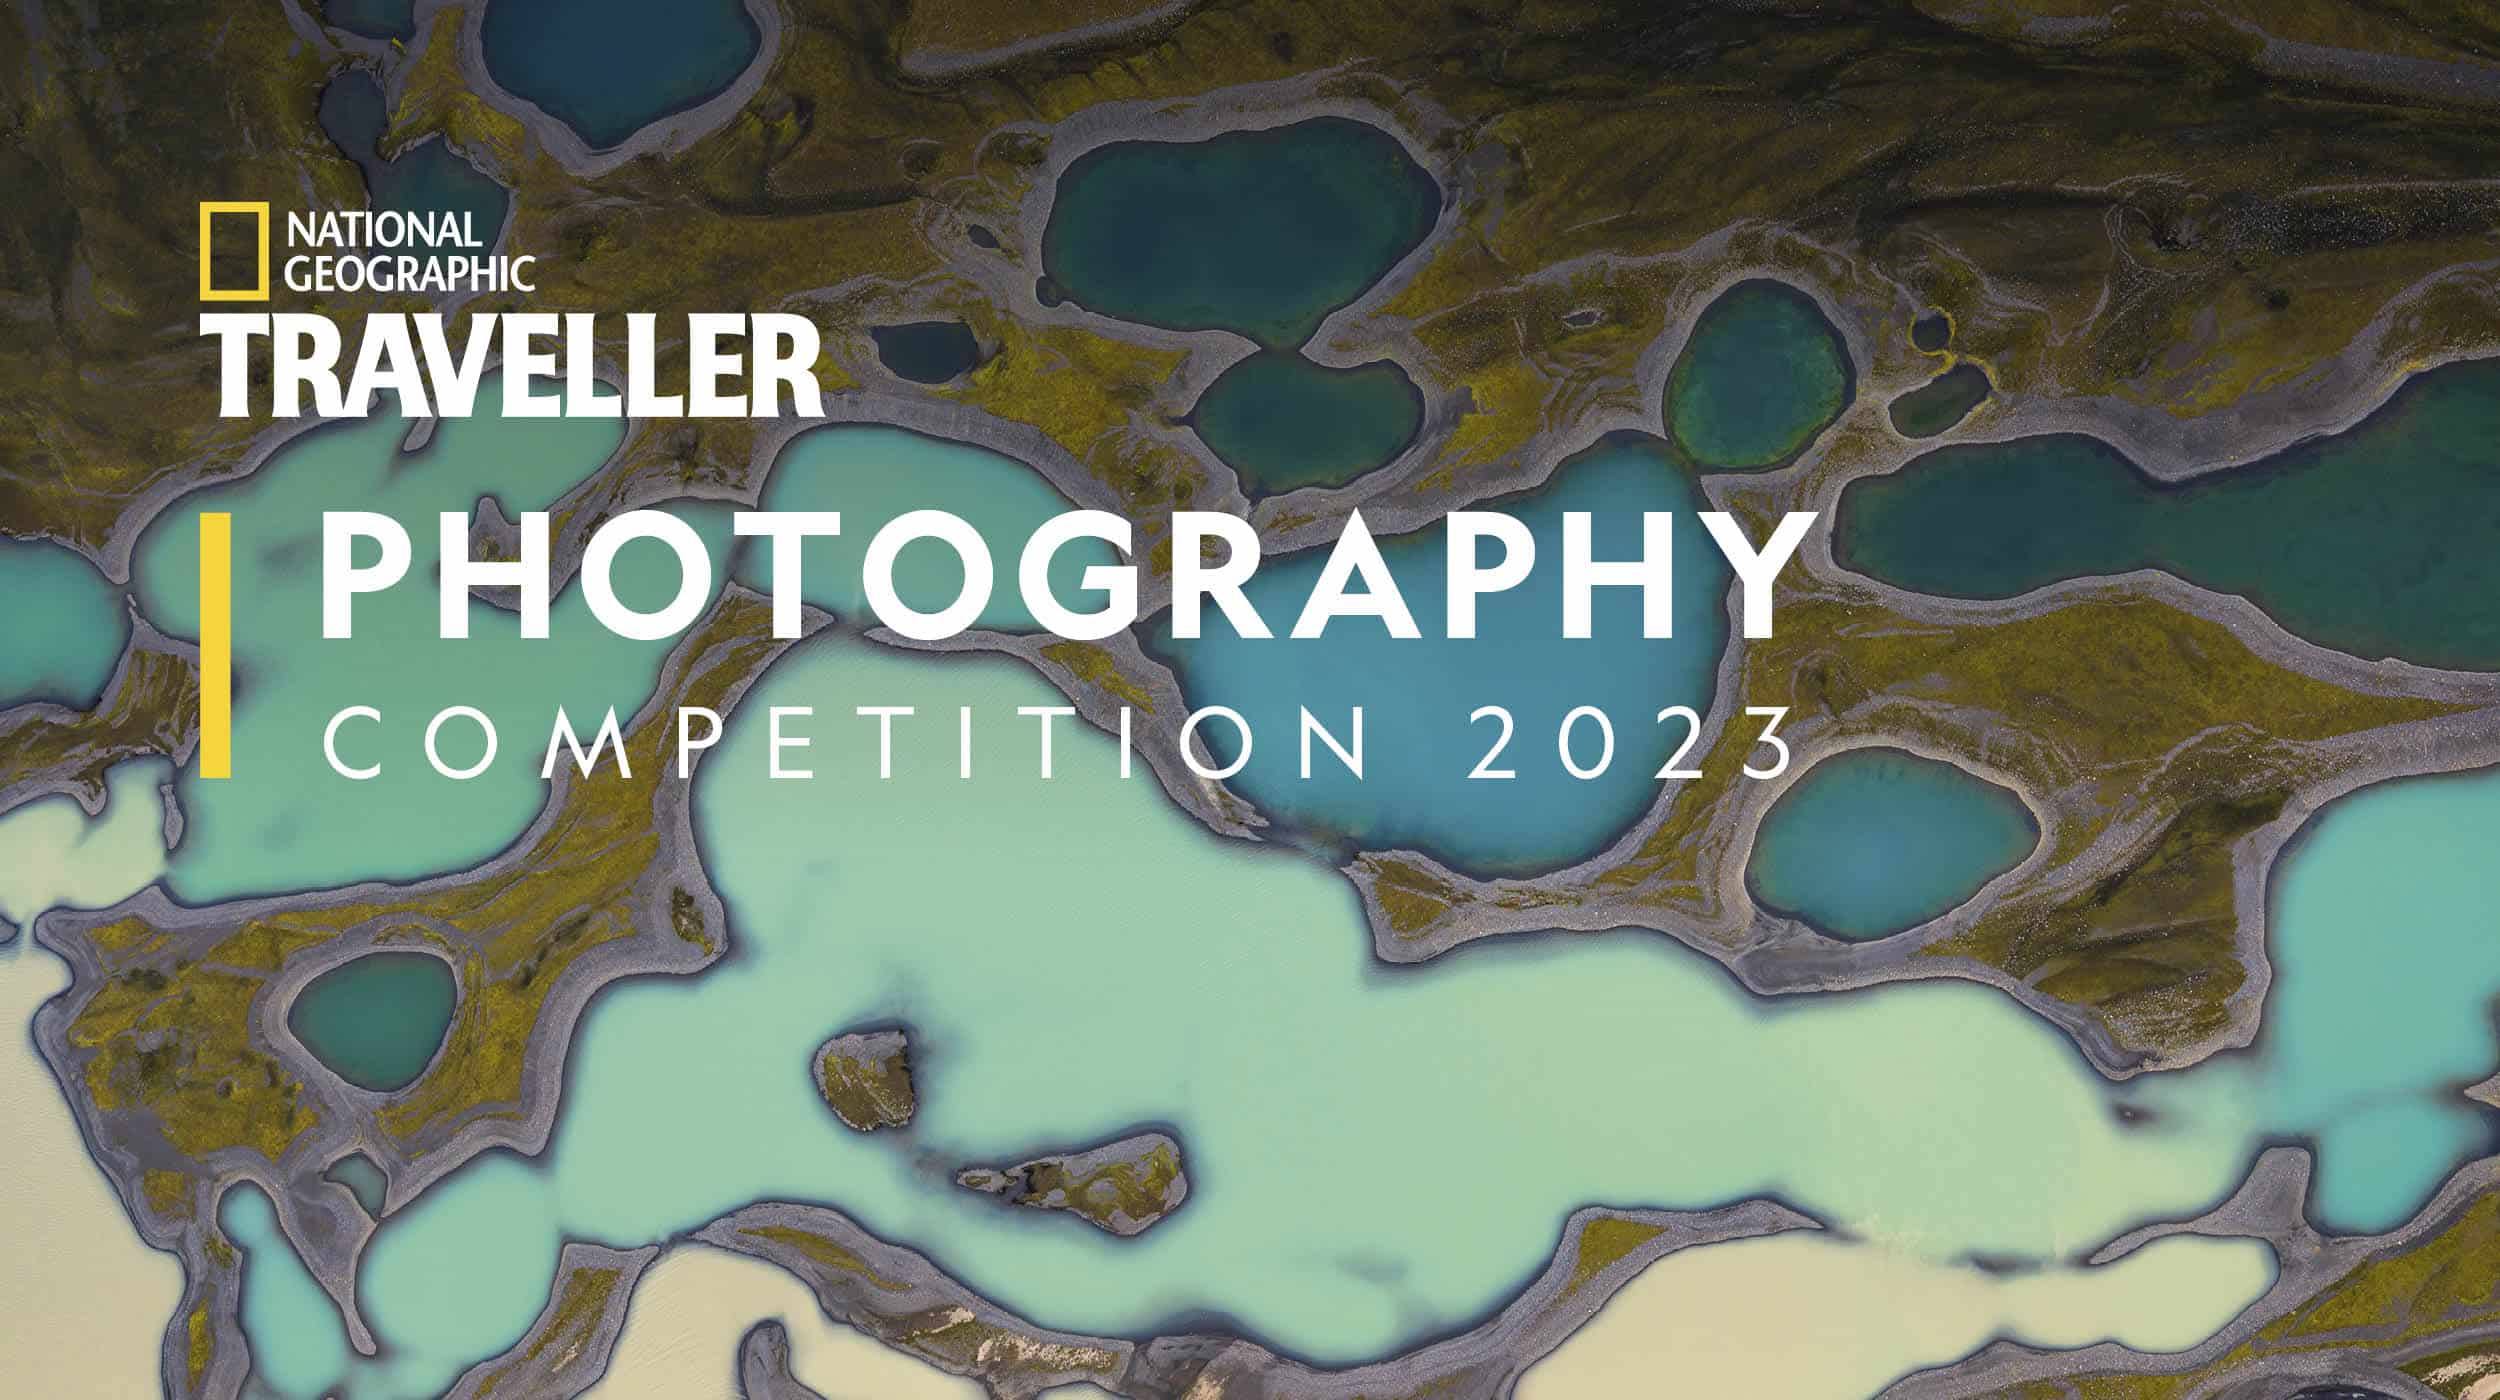 National Geographic Traveller (UK) has announced the winners of its Photography Competition 2023.